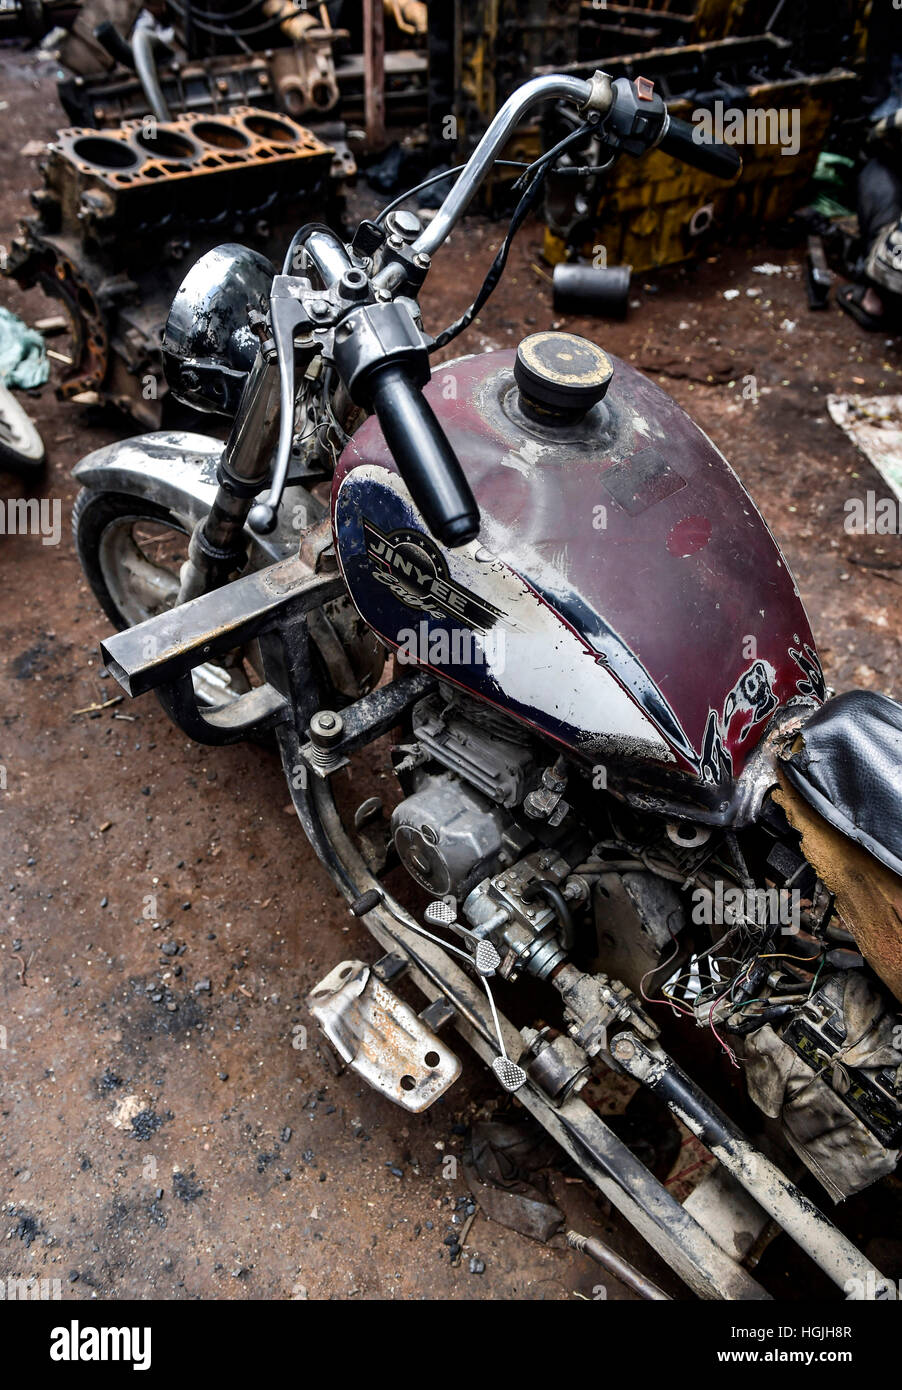 Yinyee Chopper motorcycle in a workshop, Phnom Penh, Cambodia Stock Photo